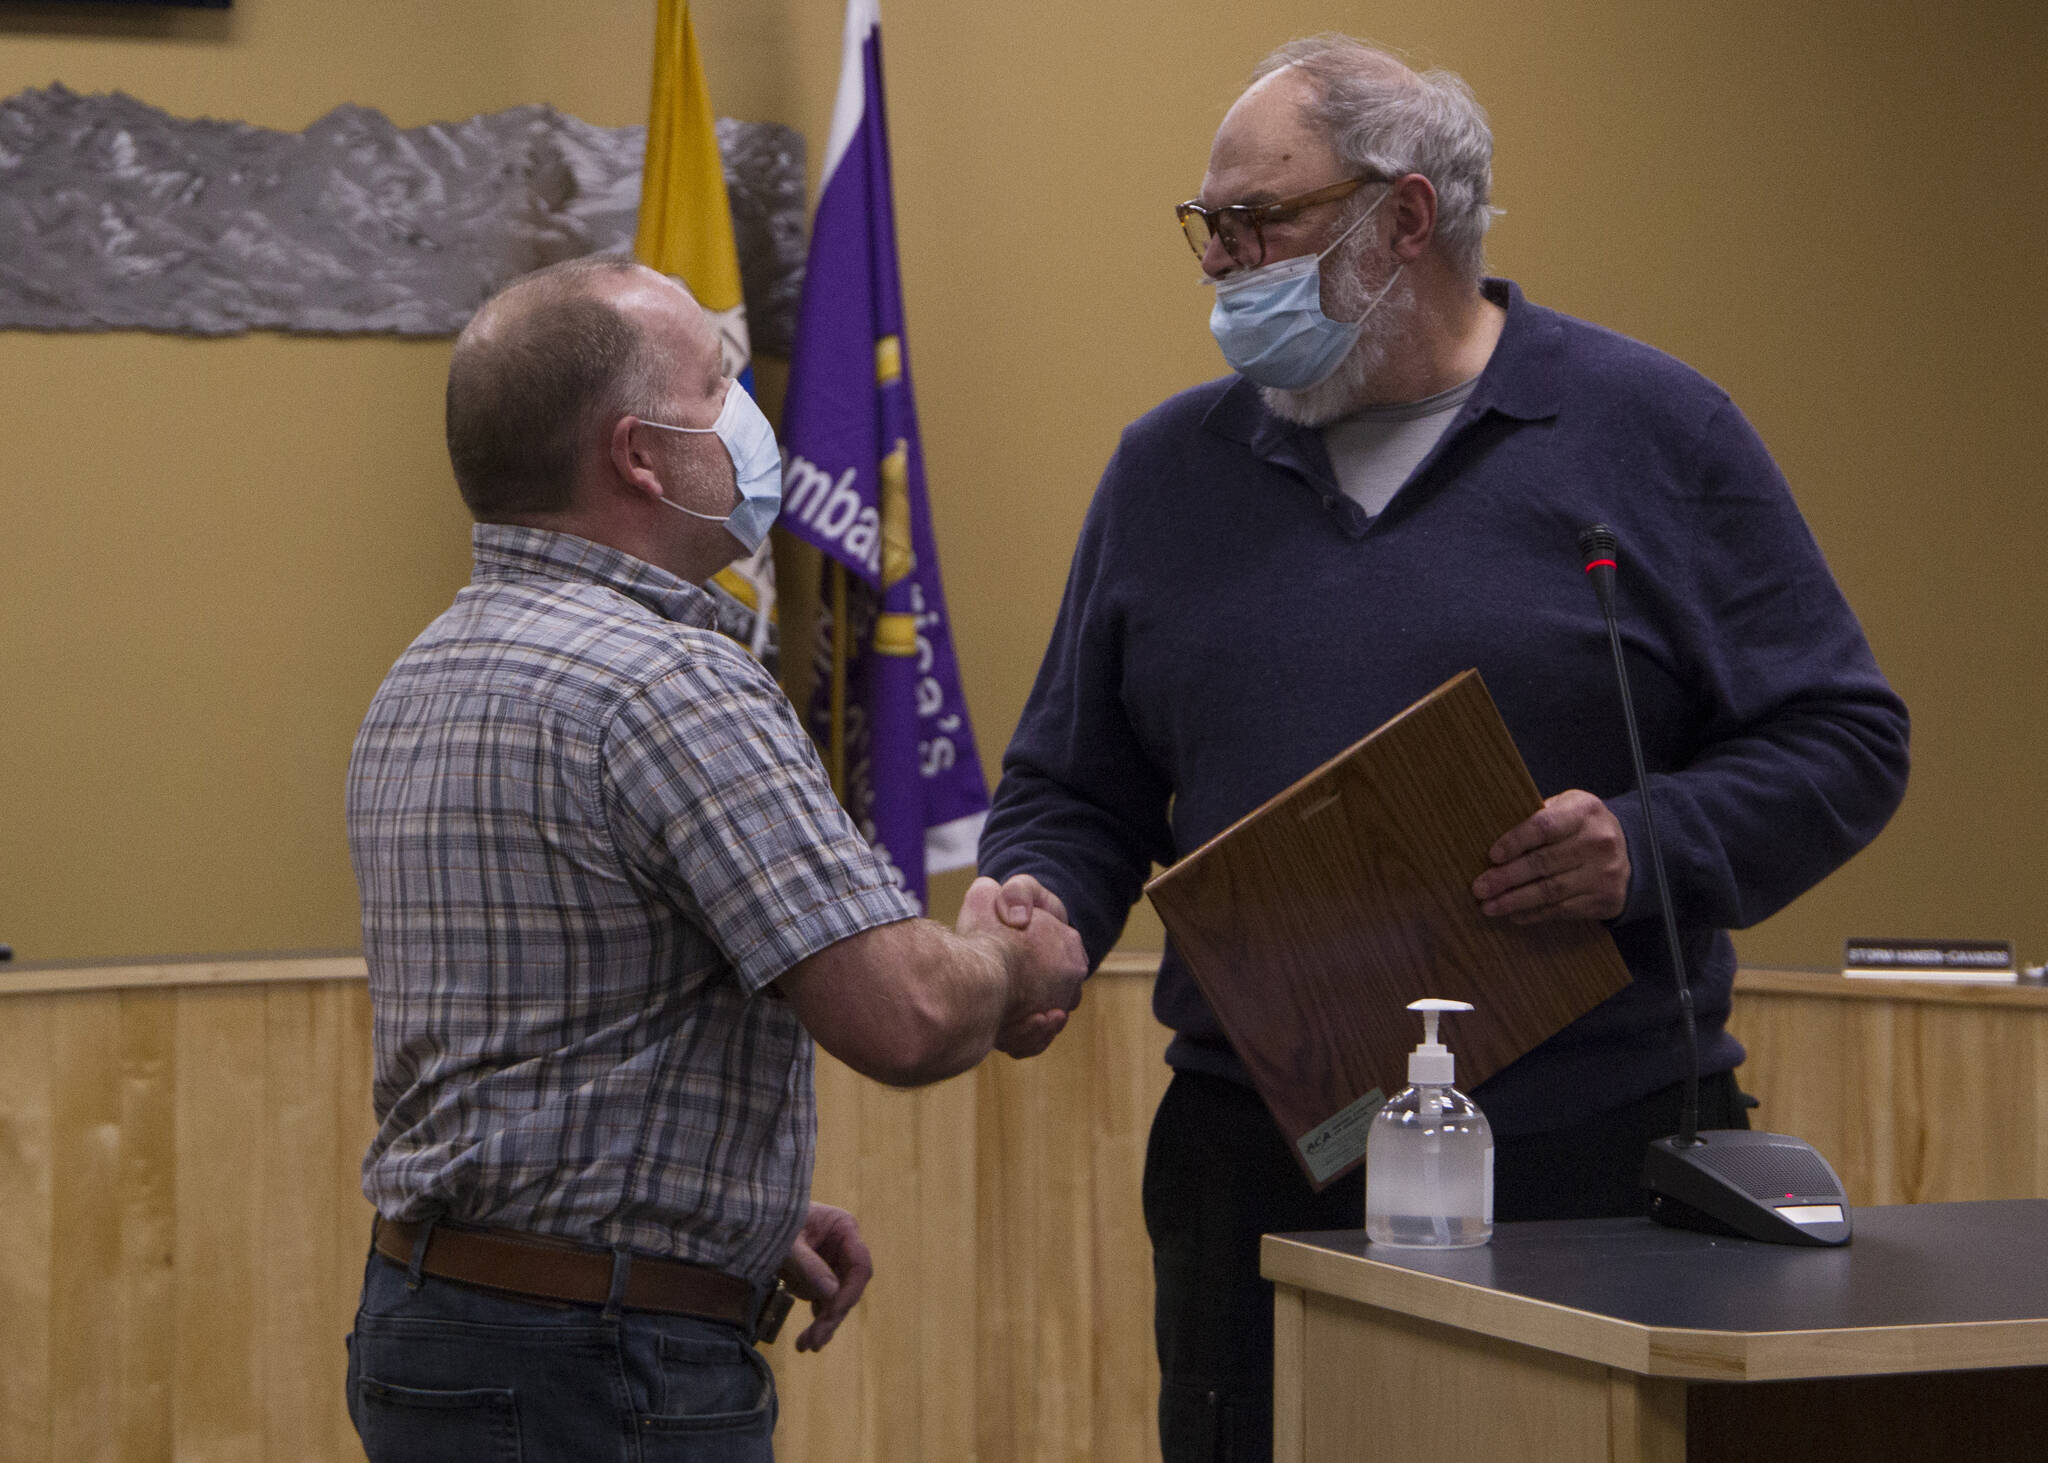 Mayor Ken Castner thanks former council member Heath Smith for his six years of service to the community. (Photo by Sarah Knapp/Homer News)